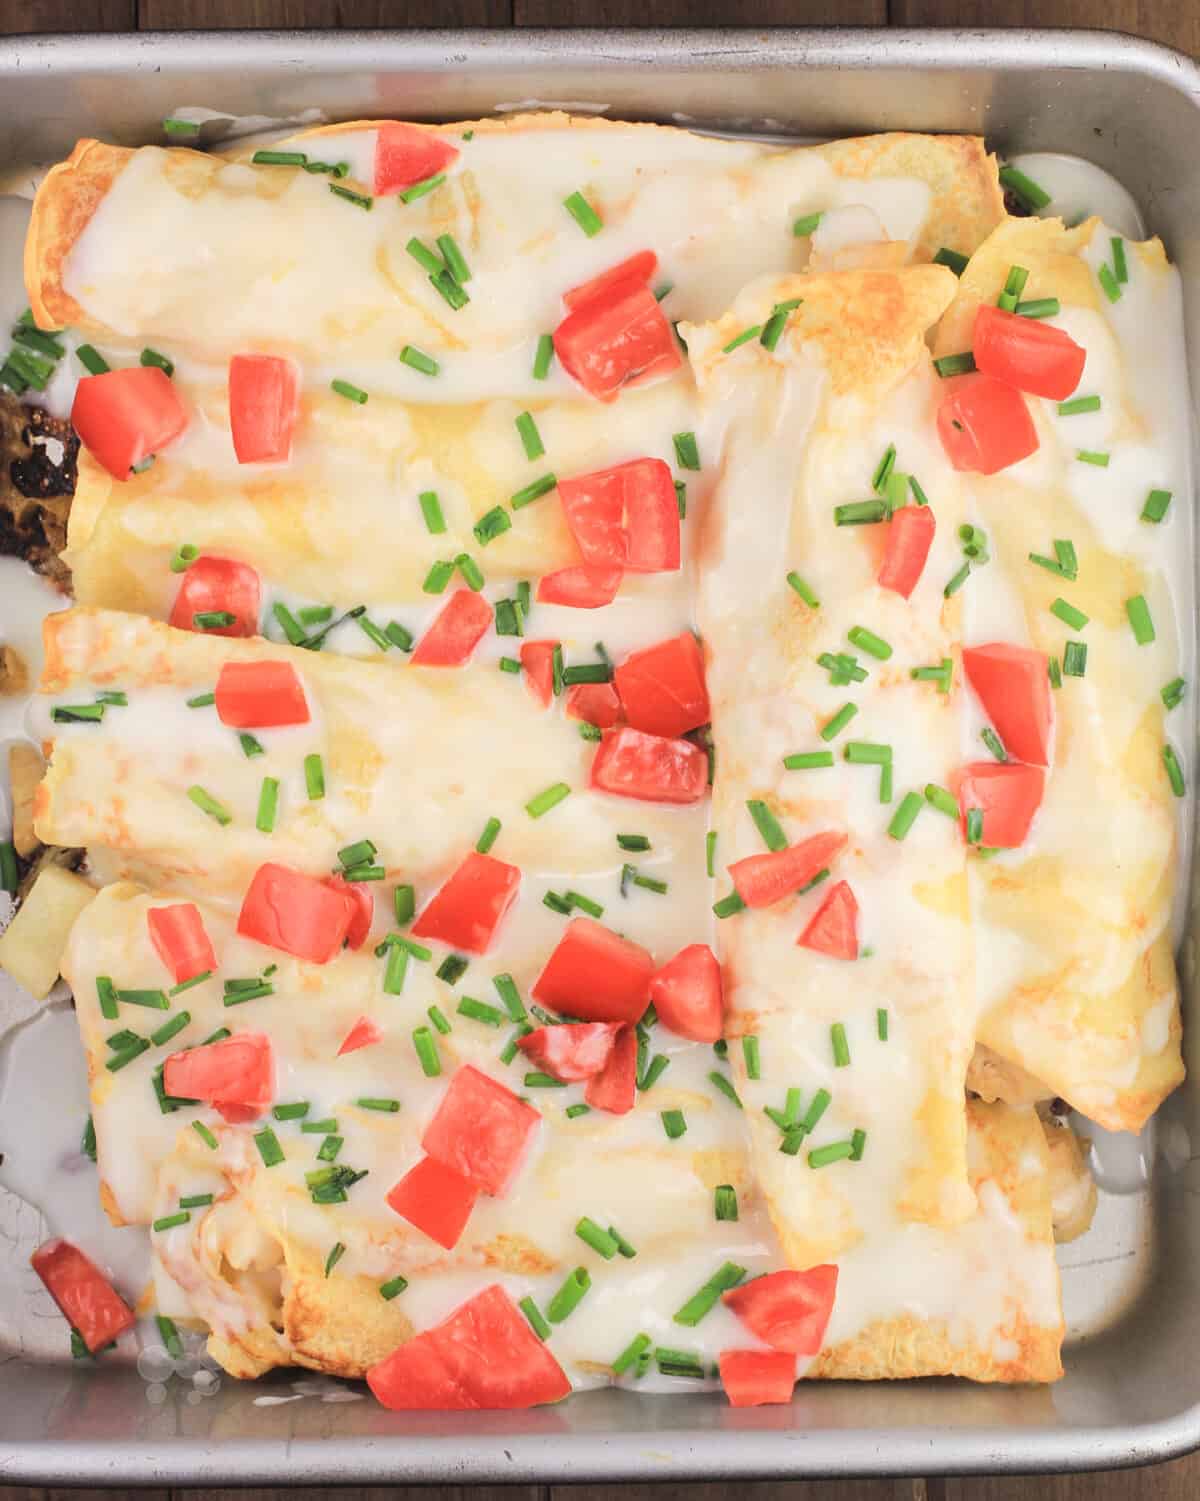 crepes in bake pan covered with lemon bechamel sauce, tomato, and chives